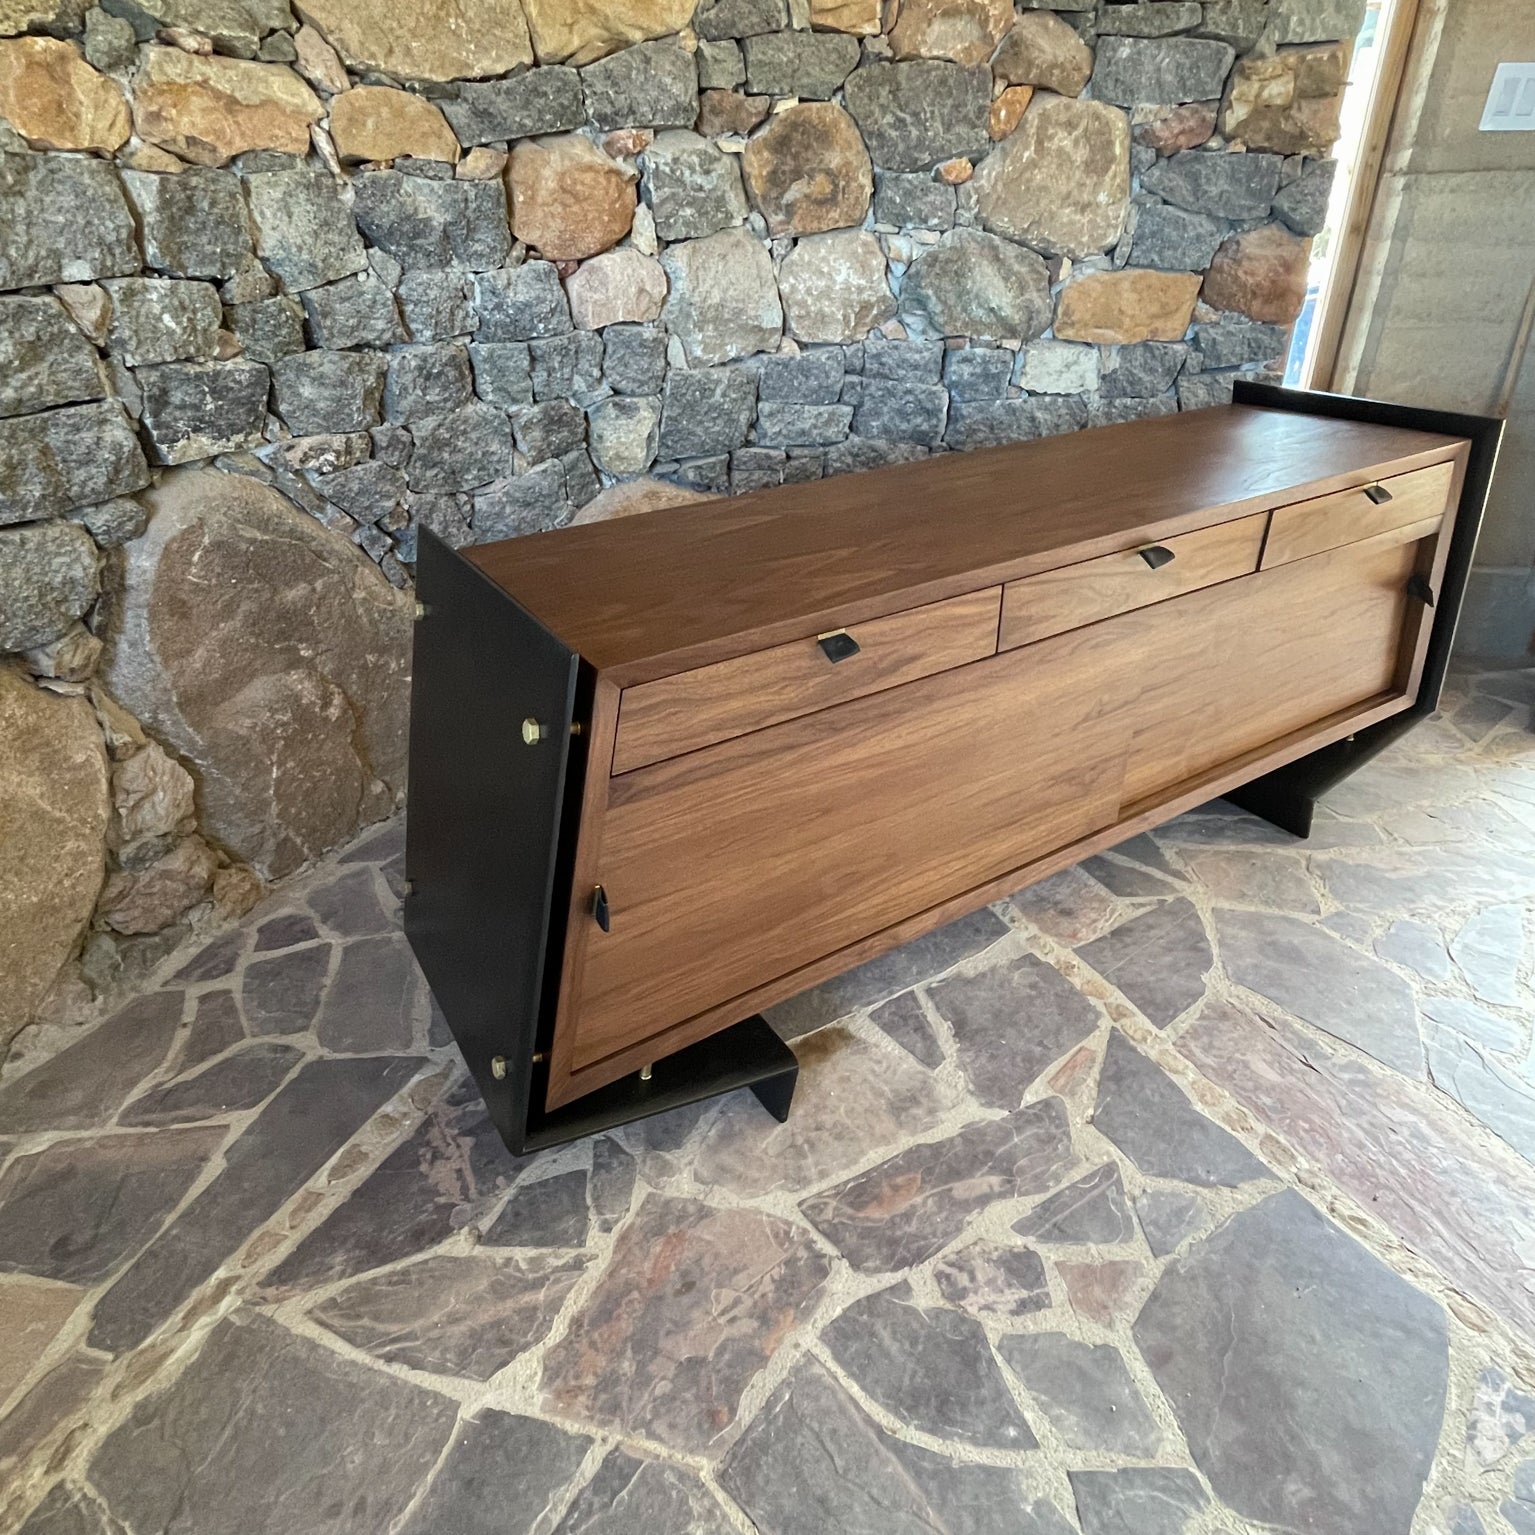 Modern Floating Credenza
Exquisite craftsmanship and details on a custom-built floating credenza handmade in California.
Crafted in walnut wood bronze and features leather pull handles. Stunning presentation.
Designed by Pablo Romo for AMBIANIC.